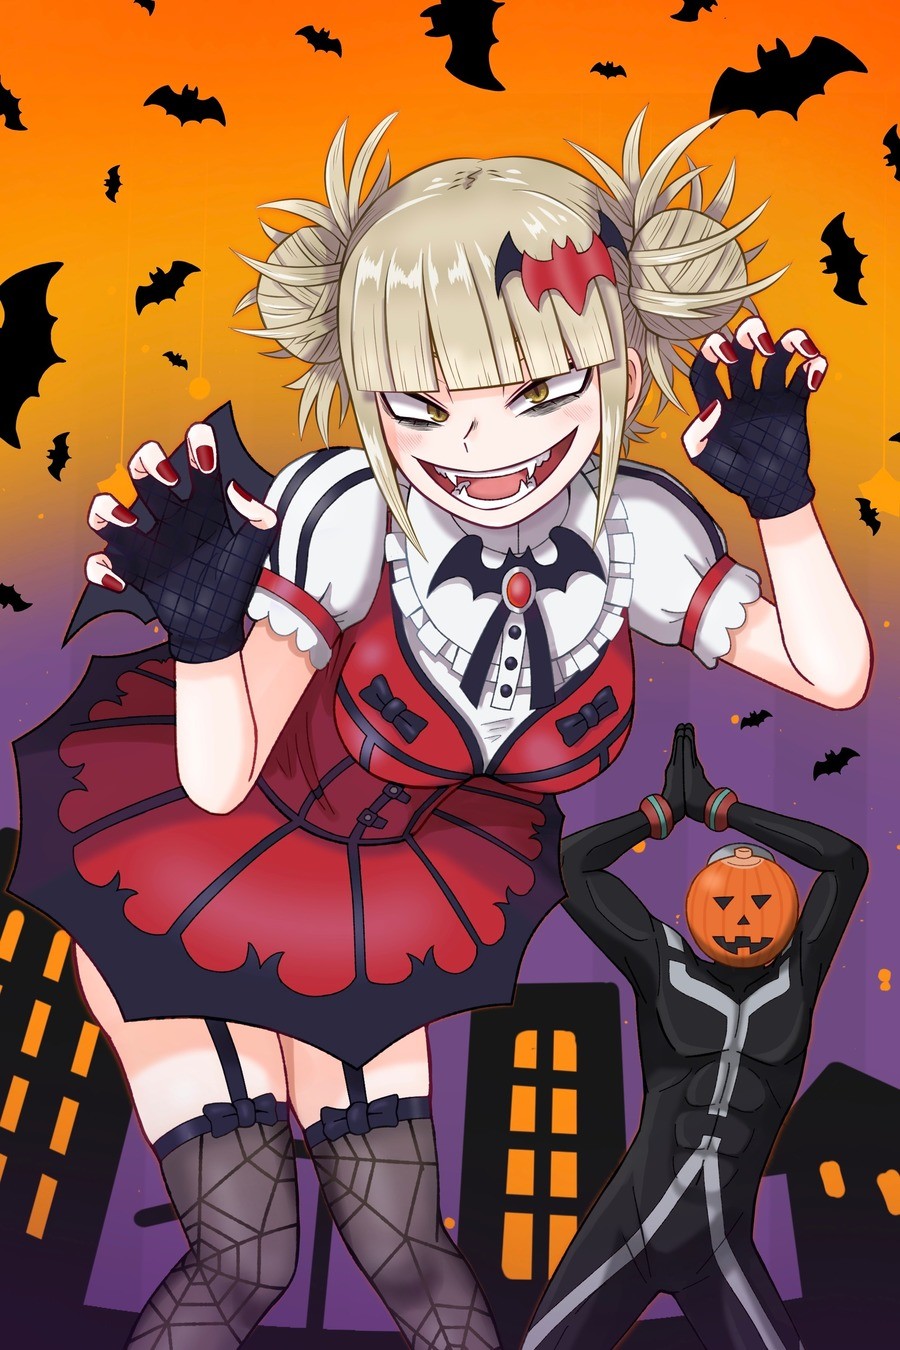 Daily Toga - 820: Halloween Toga. join list: DailyToga (477 subs)Mention History Source: .. I know she would probably kill me but I'd tap that